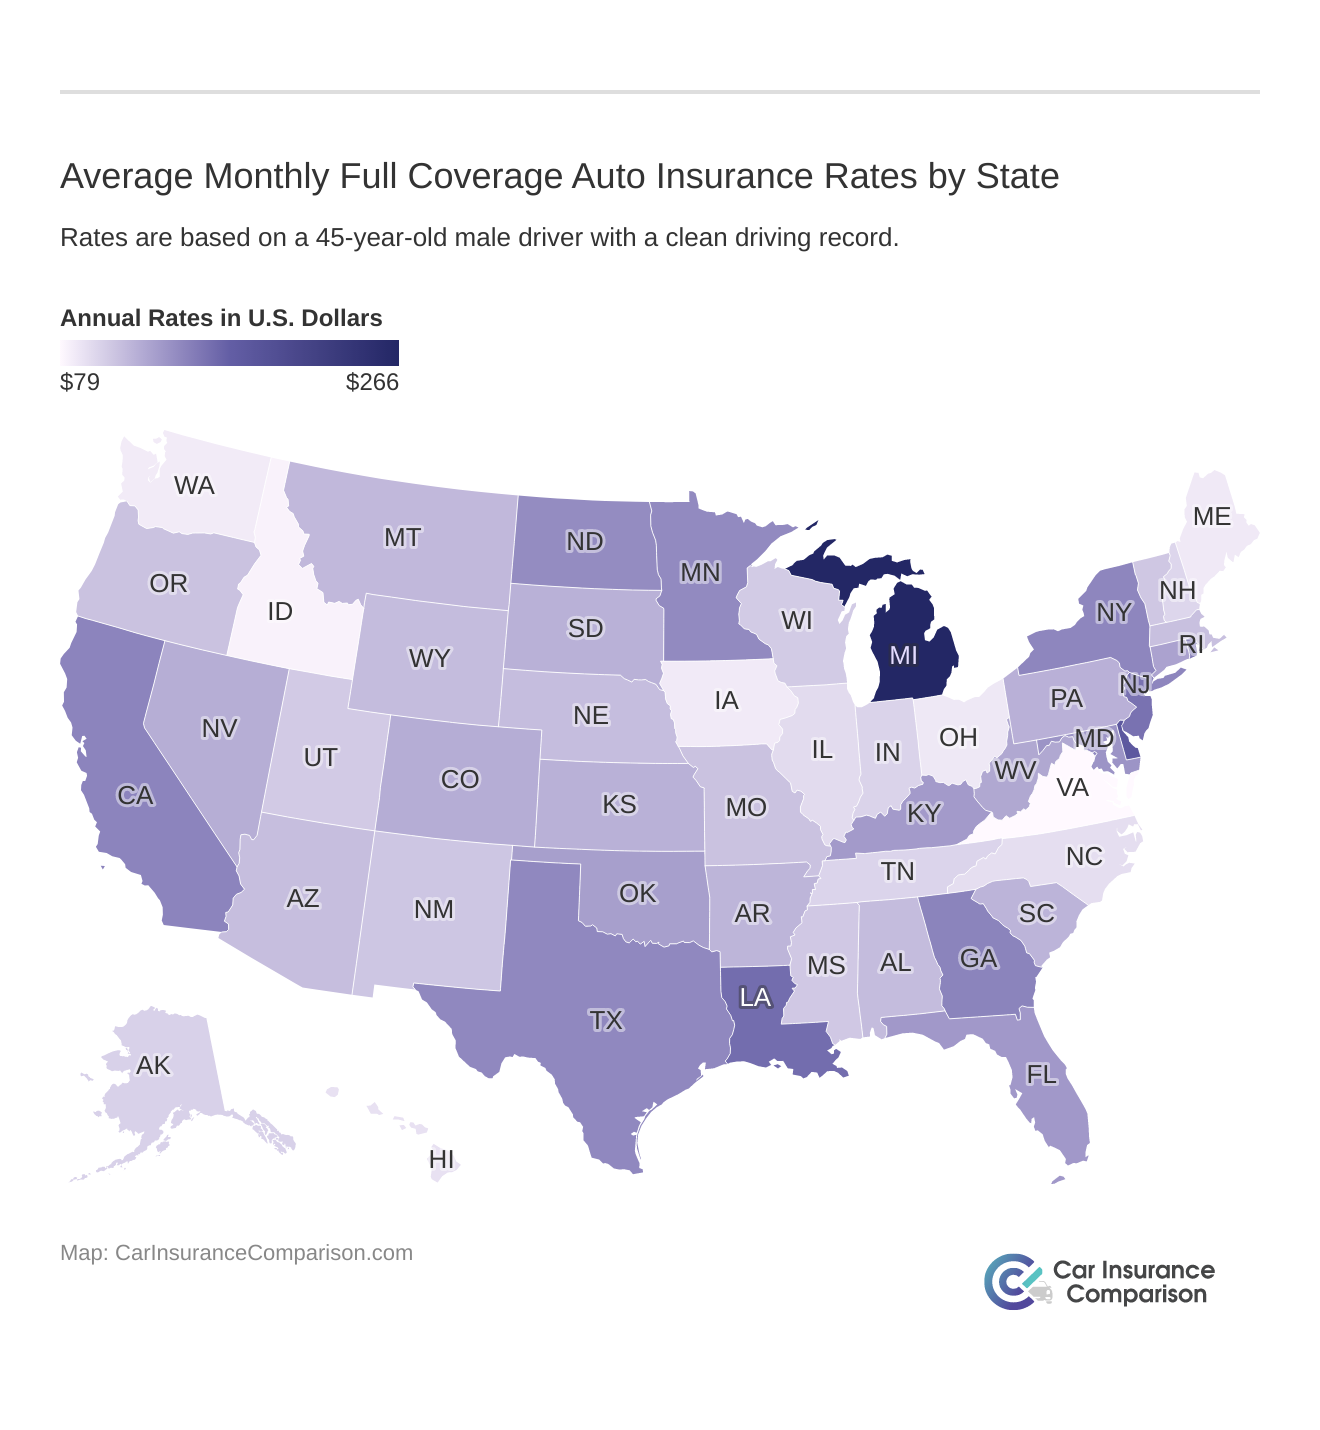 <h3>Average Monthly Full Coverage Auto Insurance Rates by State</h3>